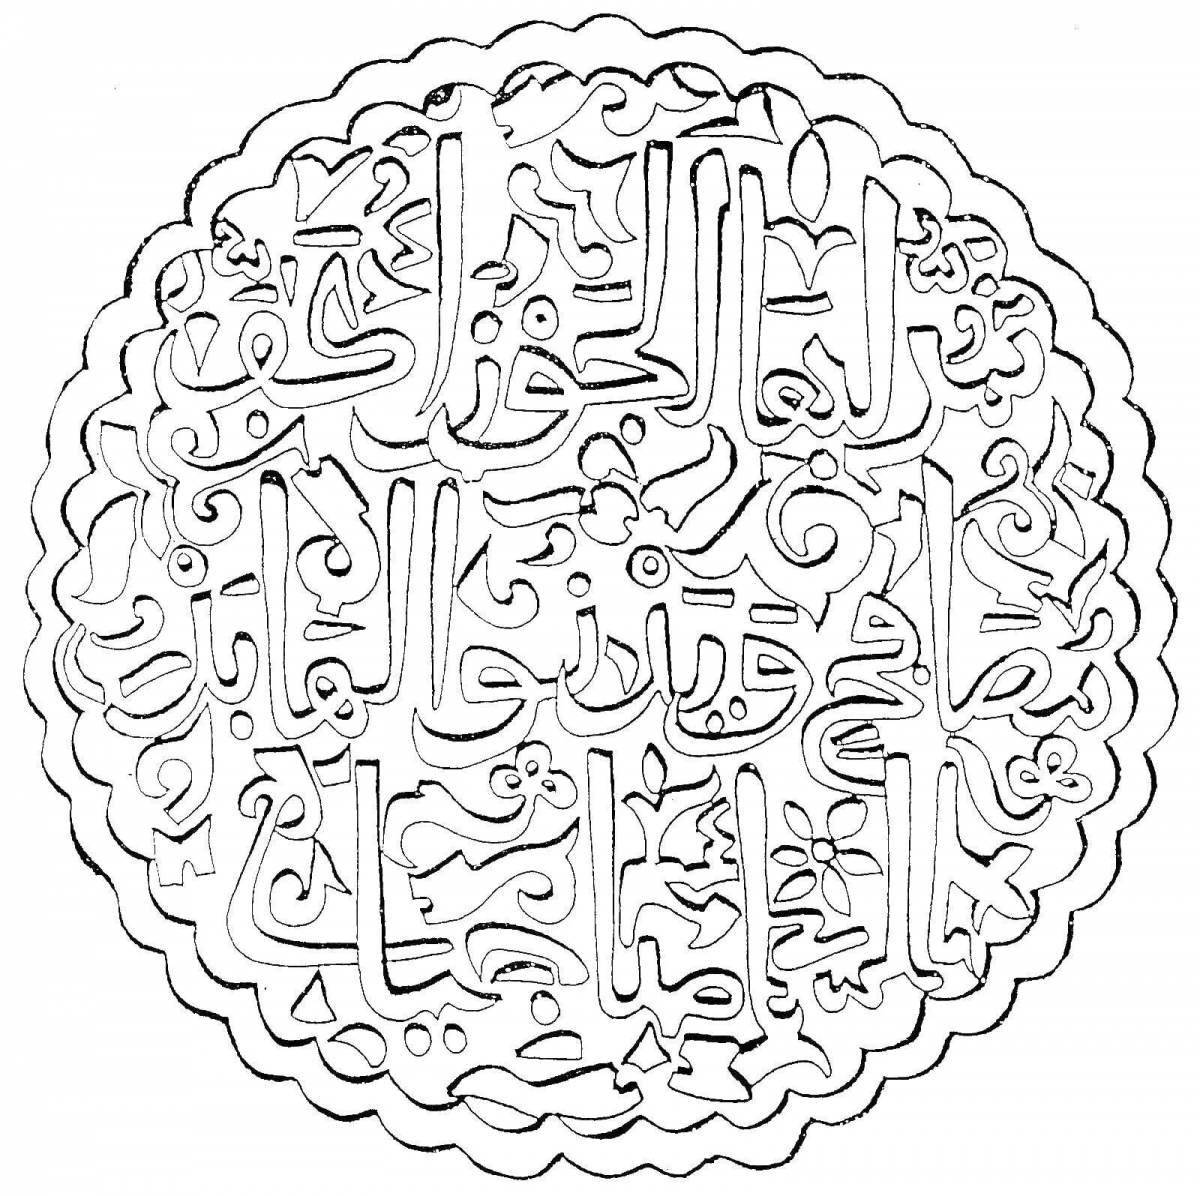 Gorgeous quran coloring page